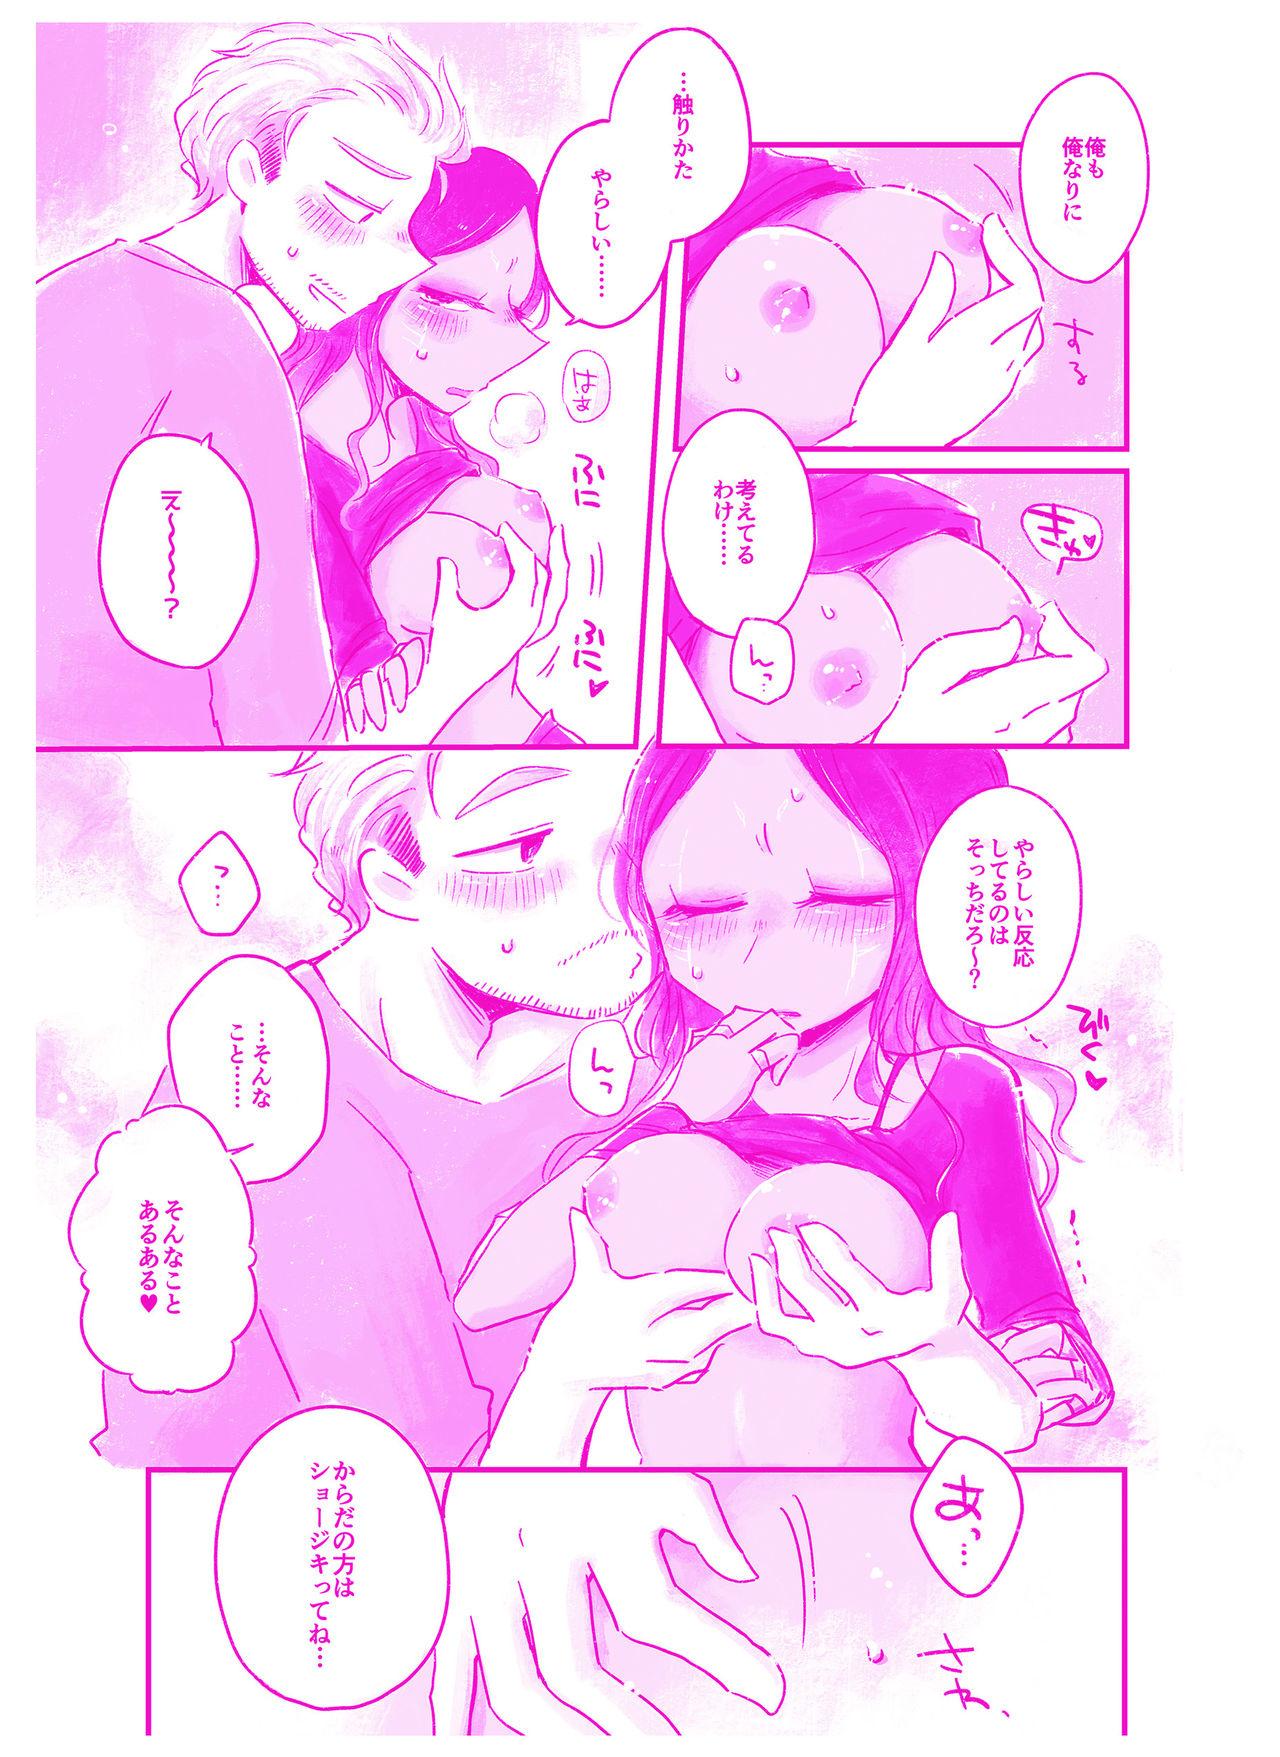 Pink 言われてみてえもんだ - Guardians of the galaxy Stepmom - Page 6